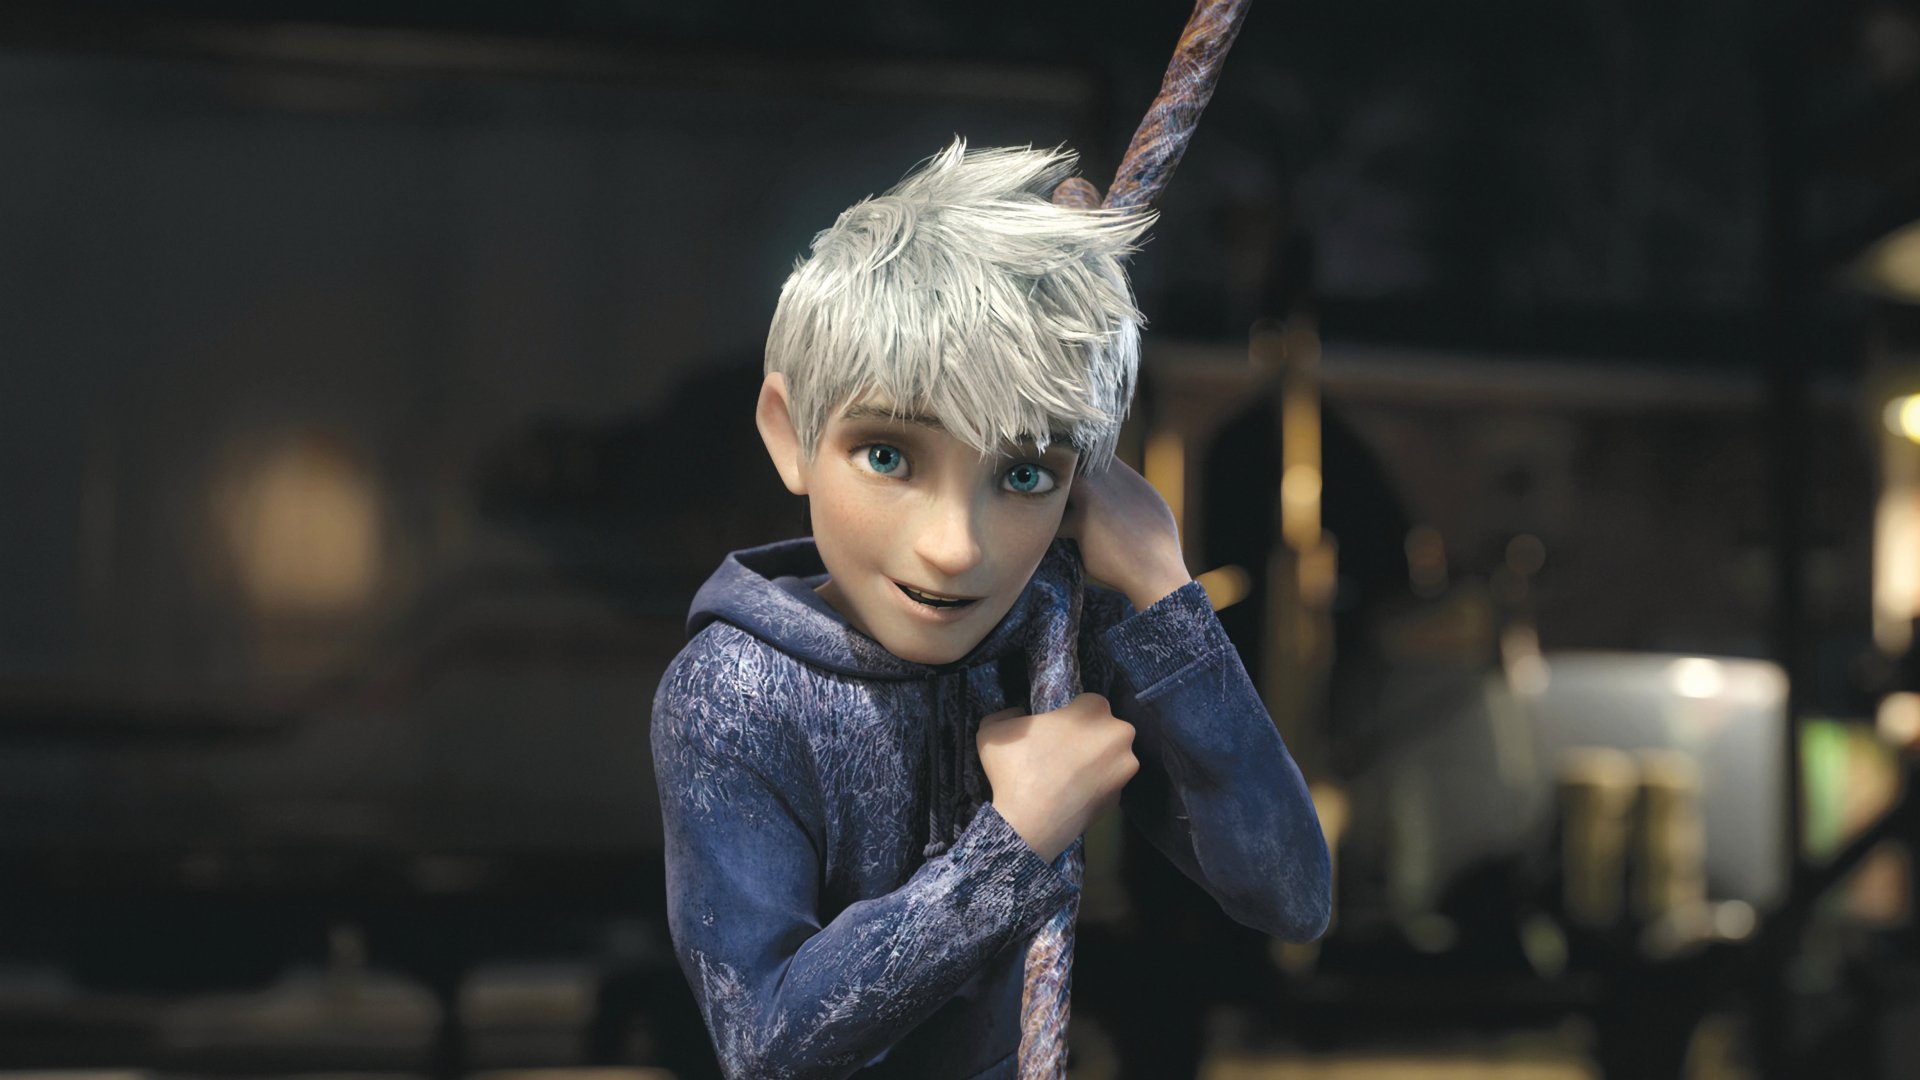 Jack frost hd papers and backgrounds